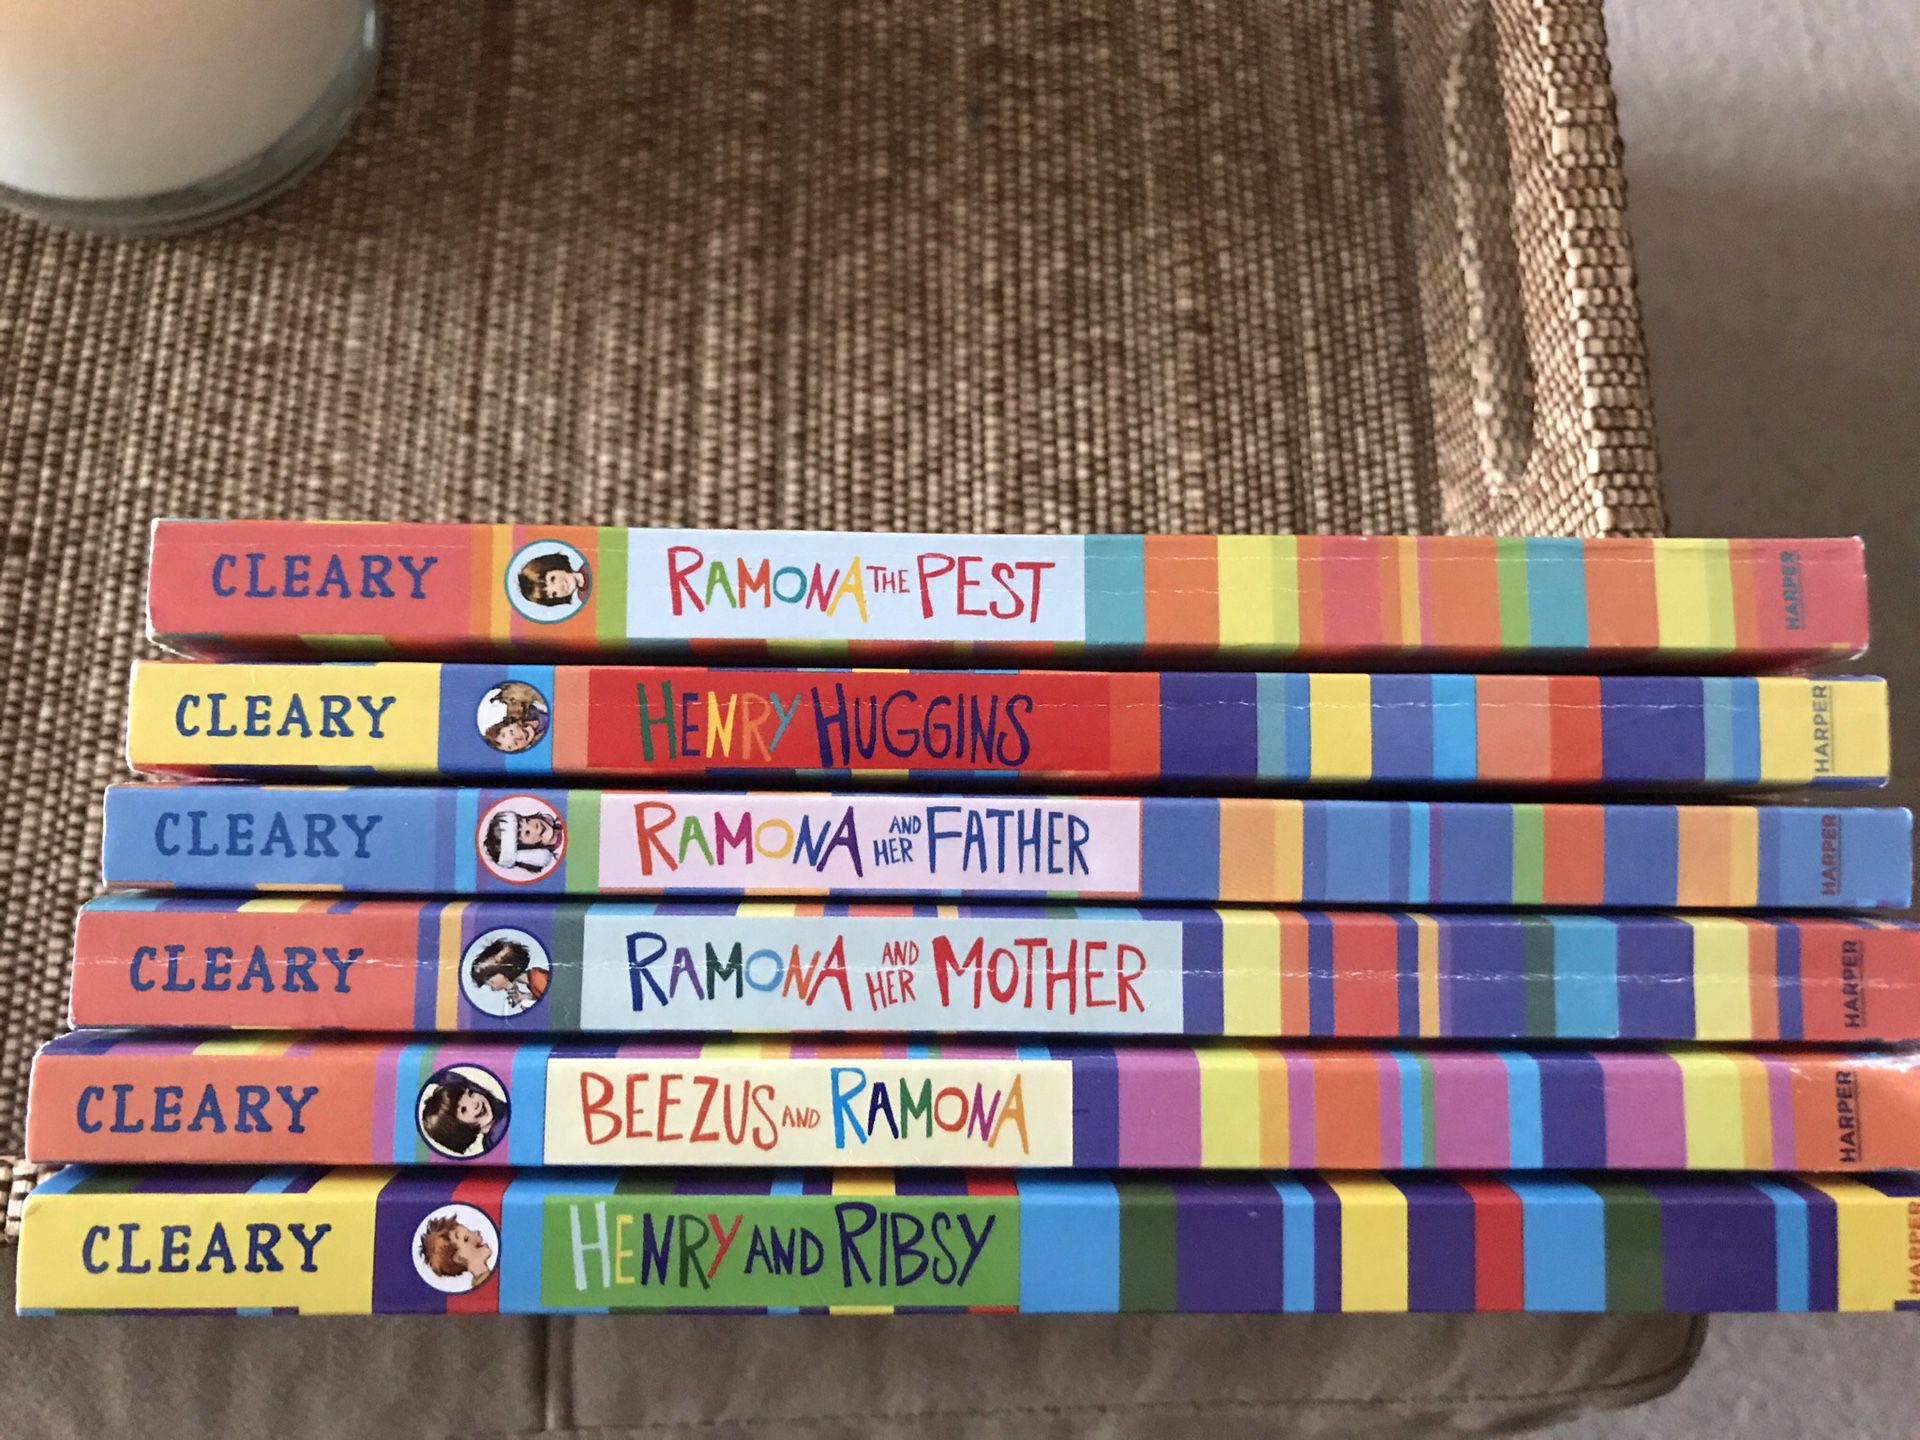 BEVERLY CLEARY BOOKS